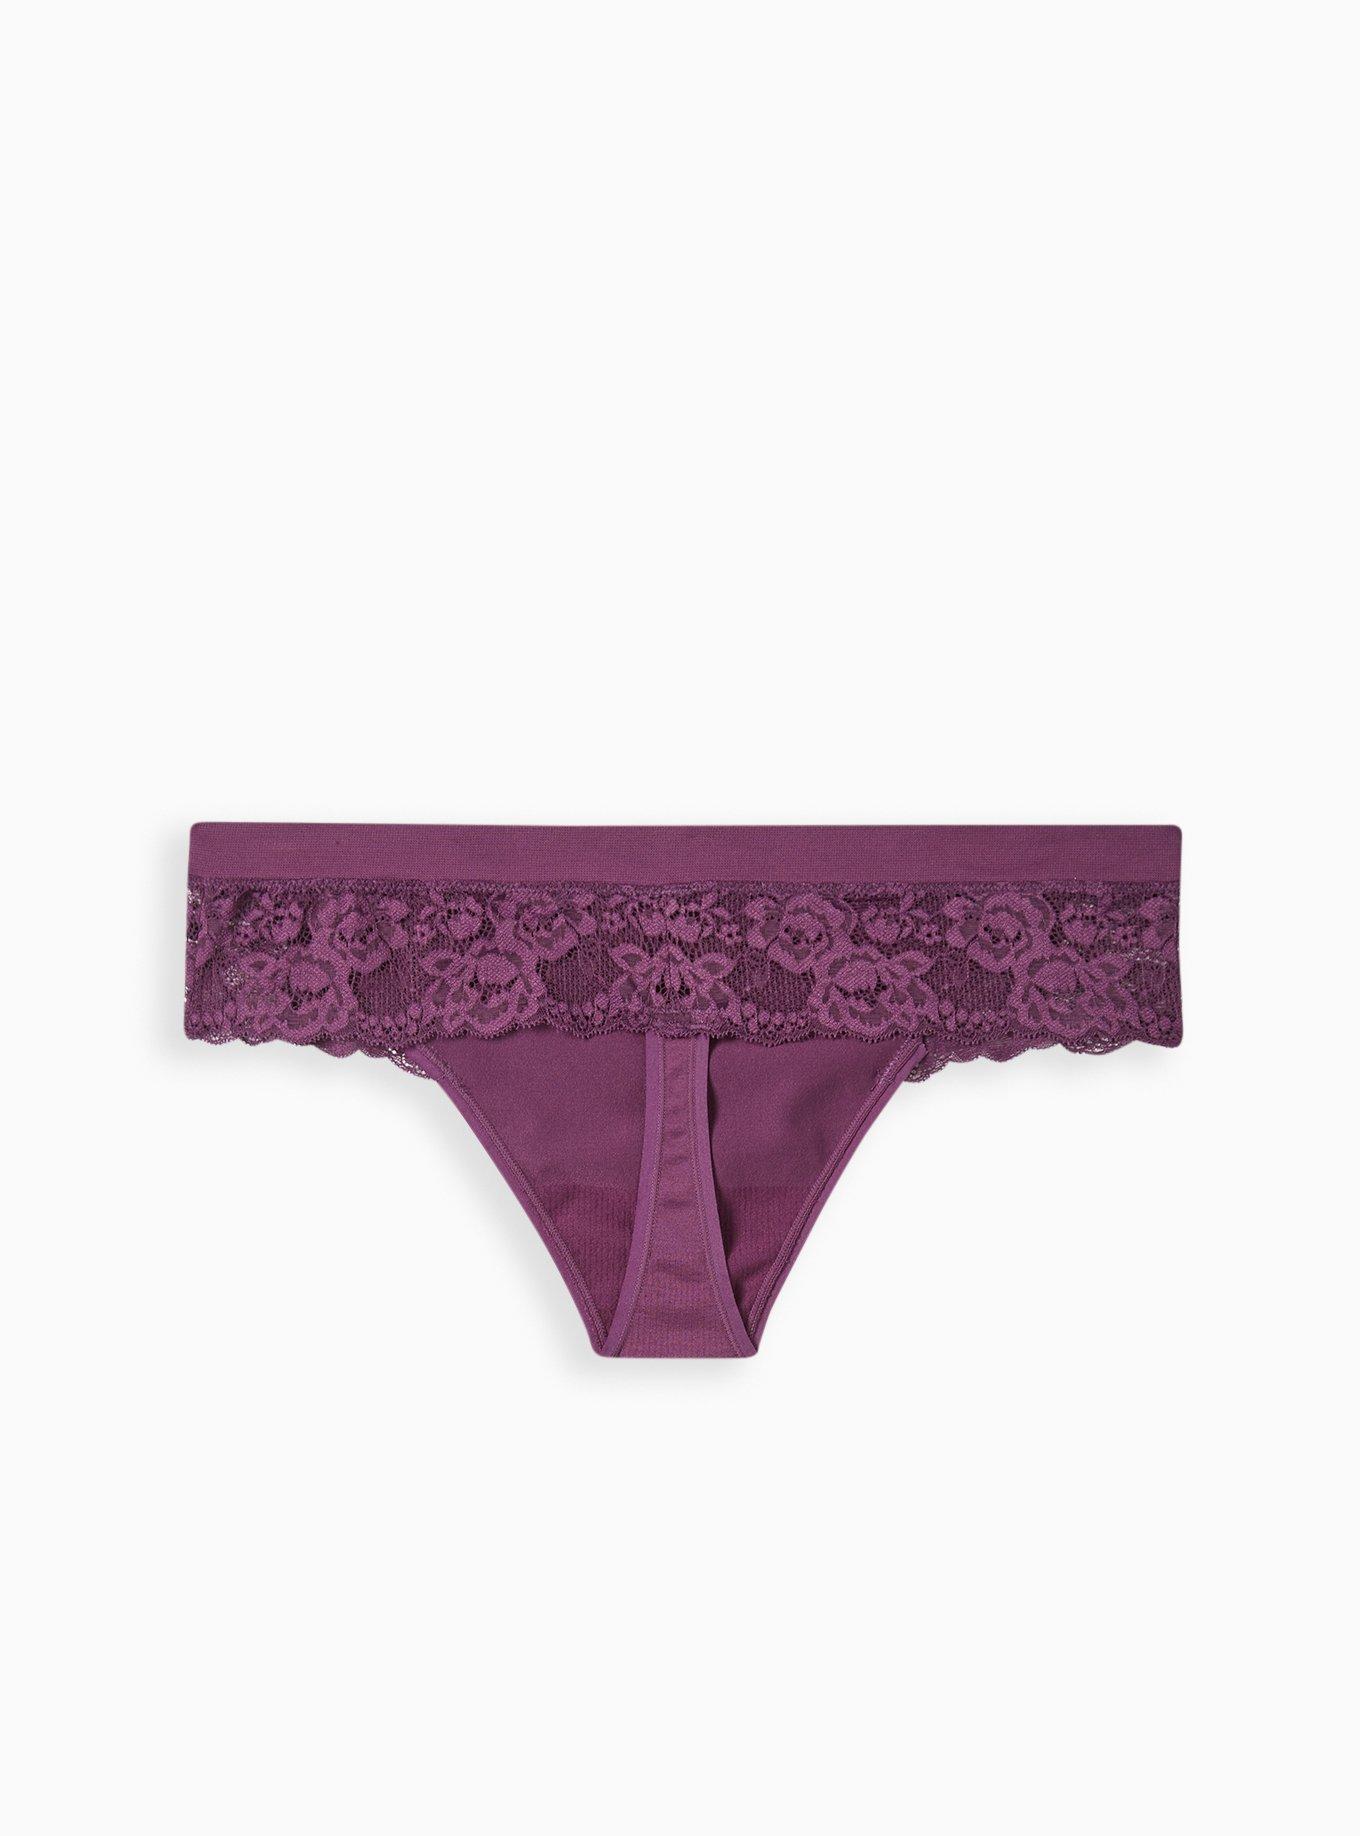 Plus Size - Simply Lace Mid Rise Thong Panty - Torrid